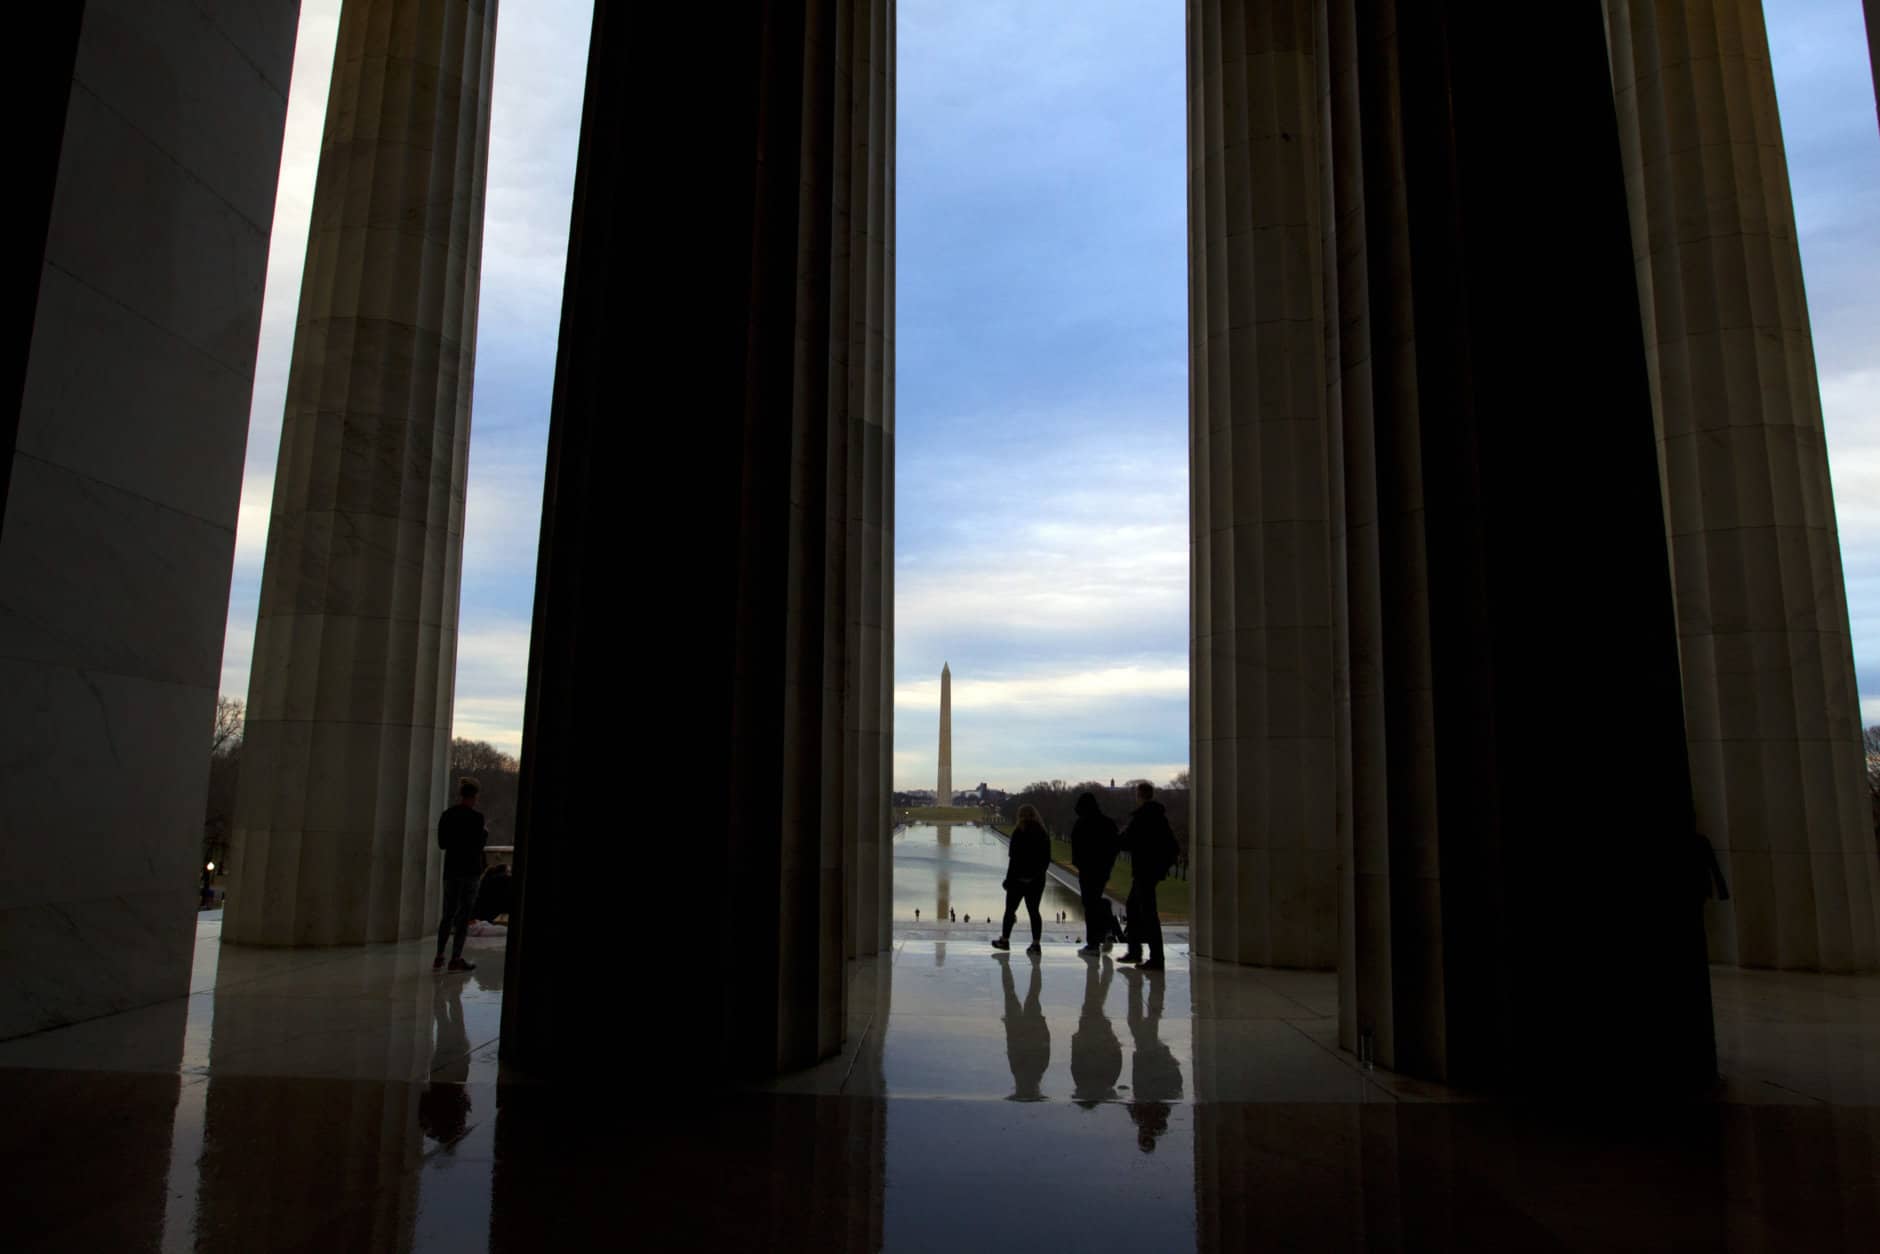 Visitors tour the Lincoln Memorial in Washington, Tuesday, Jan. 1, 2019, as a partial government shutdown stretches into its third week. A high-stakes move to reopen the government will be the first big battle between Nancy Pelosi and President Donald Trump as Democrats come into control of the House. The new Democratic House majority gavels into session this week with legislation to end the government shutdown. Pelosi and Trump both think they have public sentiment on their side in the battle over Trump's promised U.S.-Mexico border wall. (AP Photo/Jose Luis Magana)